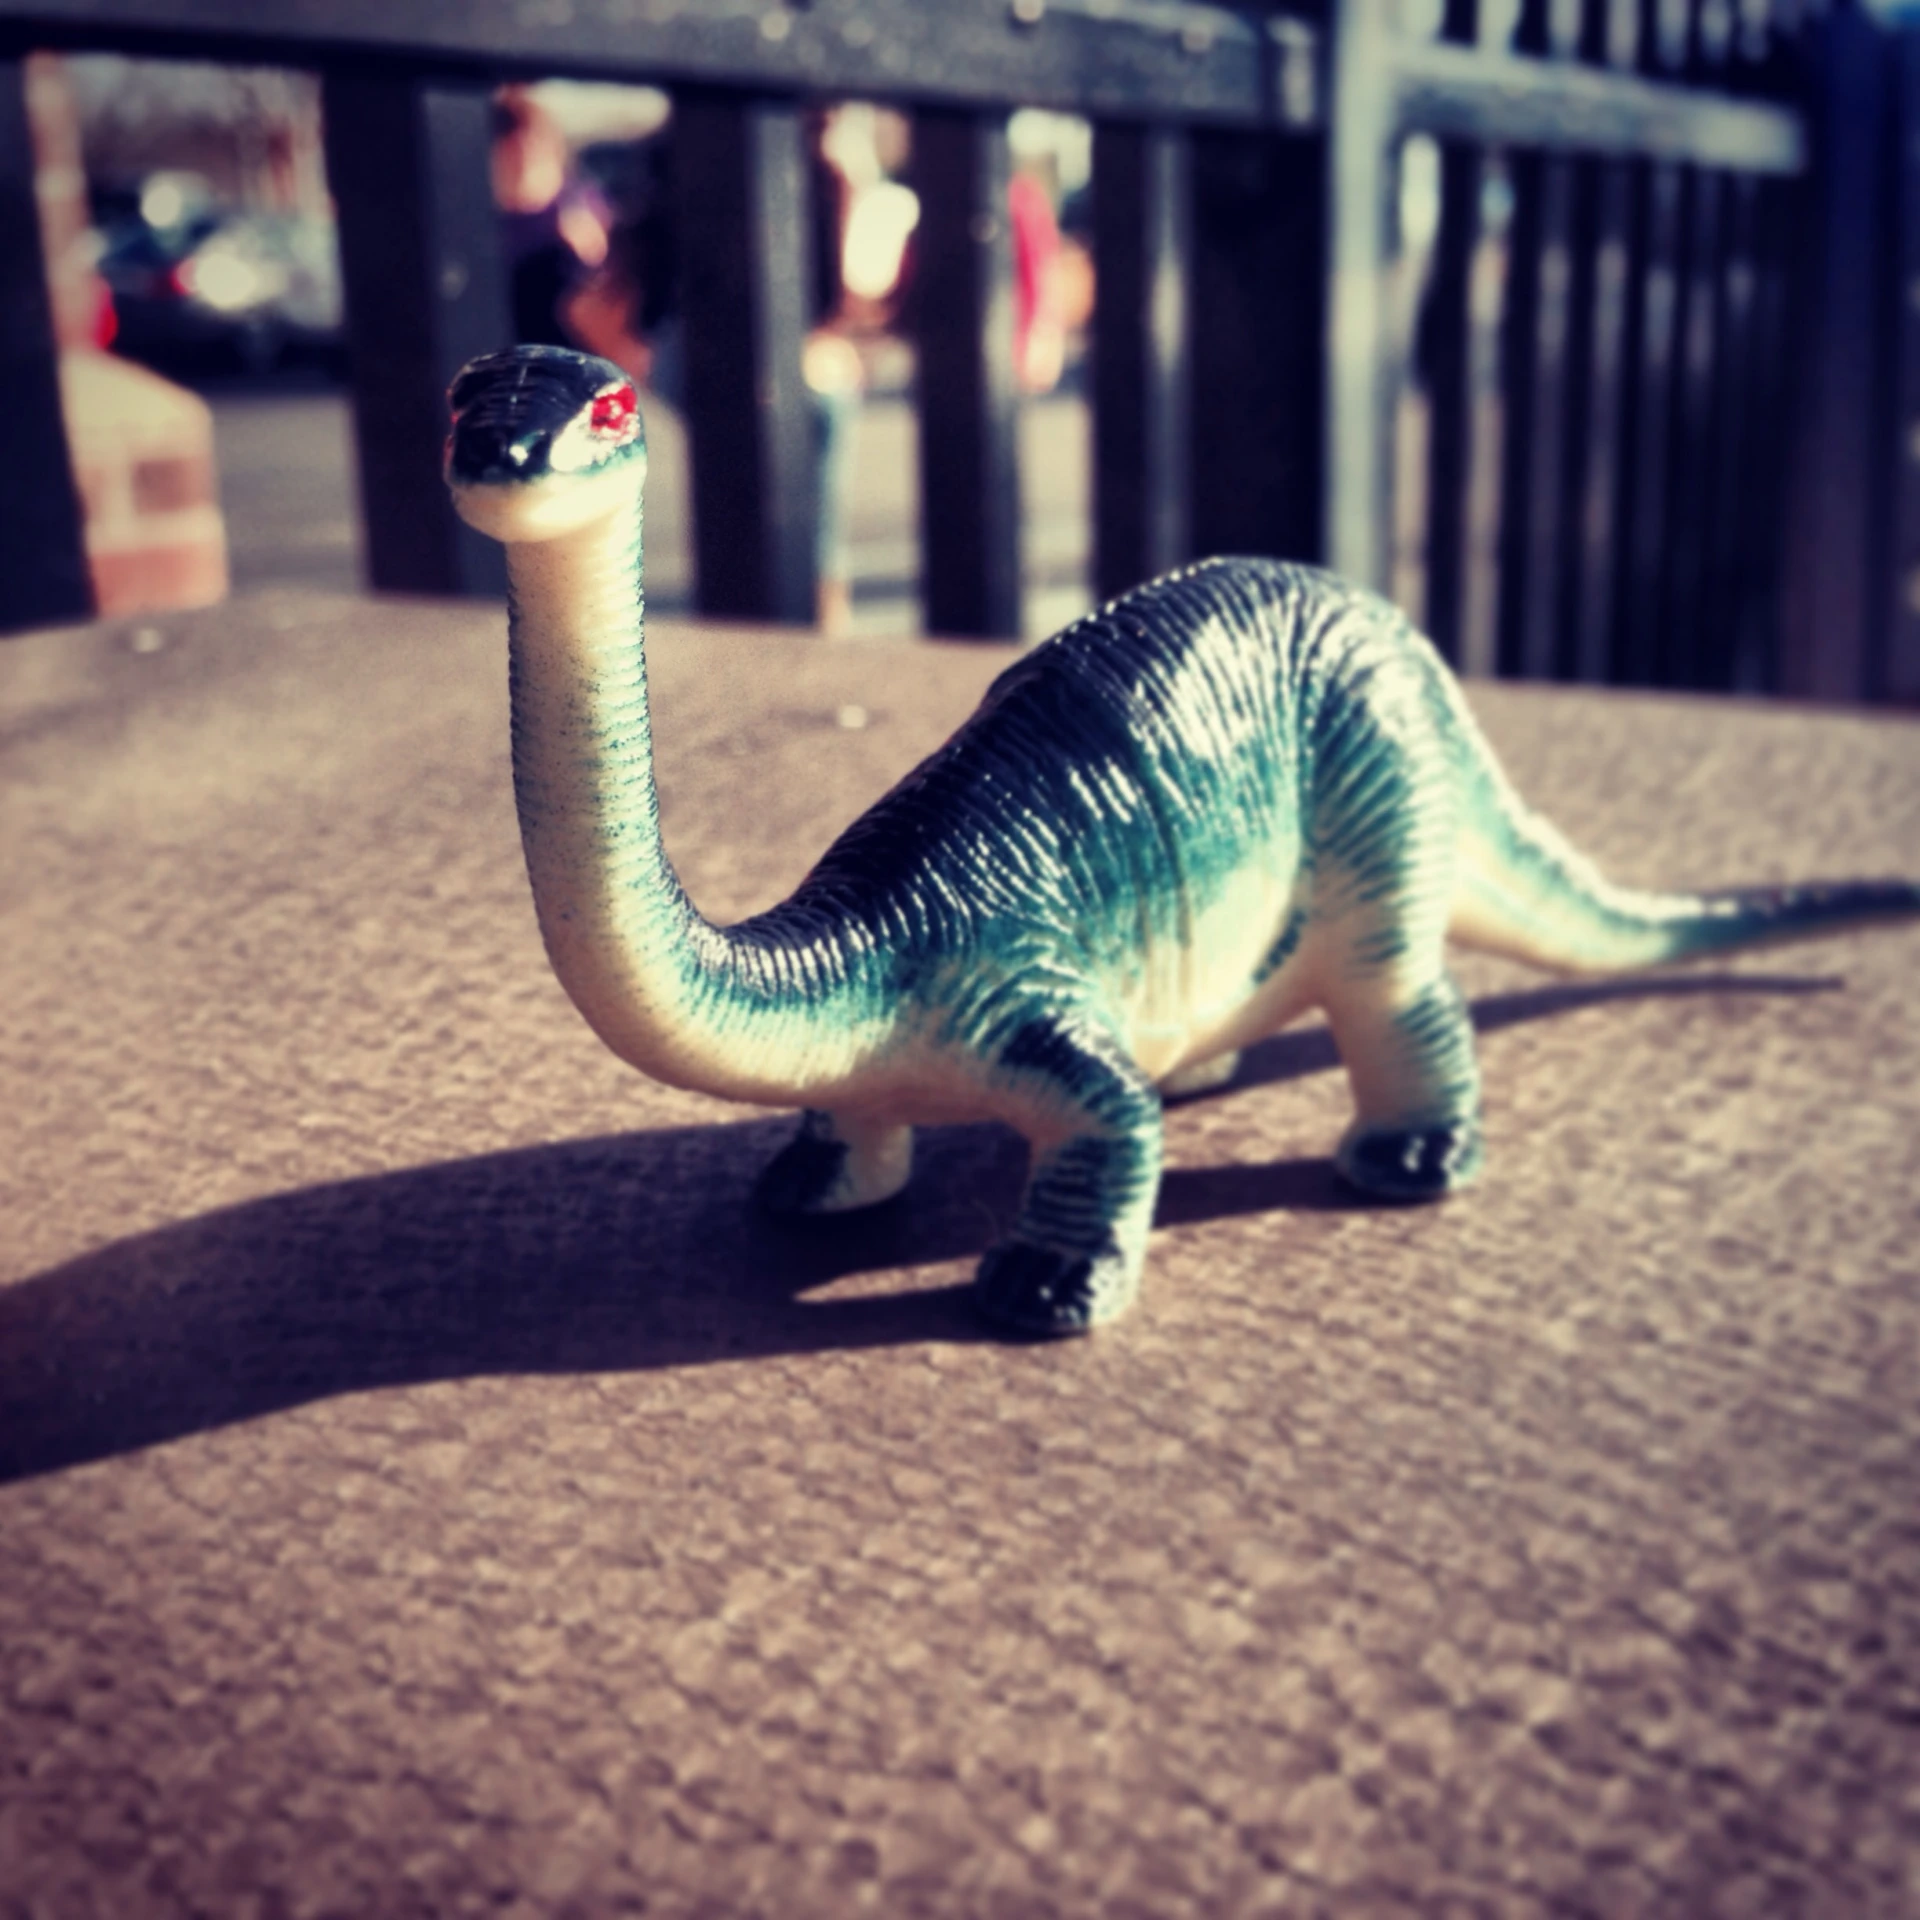 an old toy toy dinosaur is on the ground